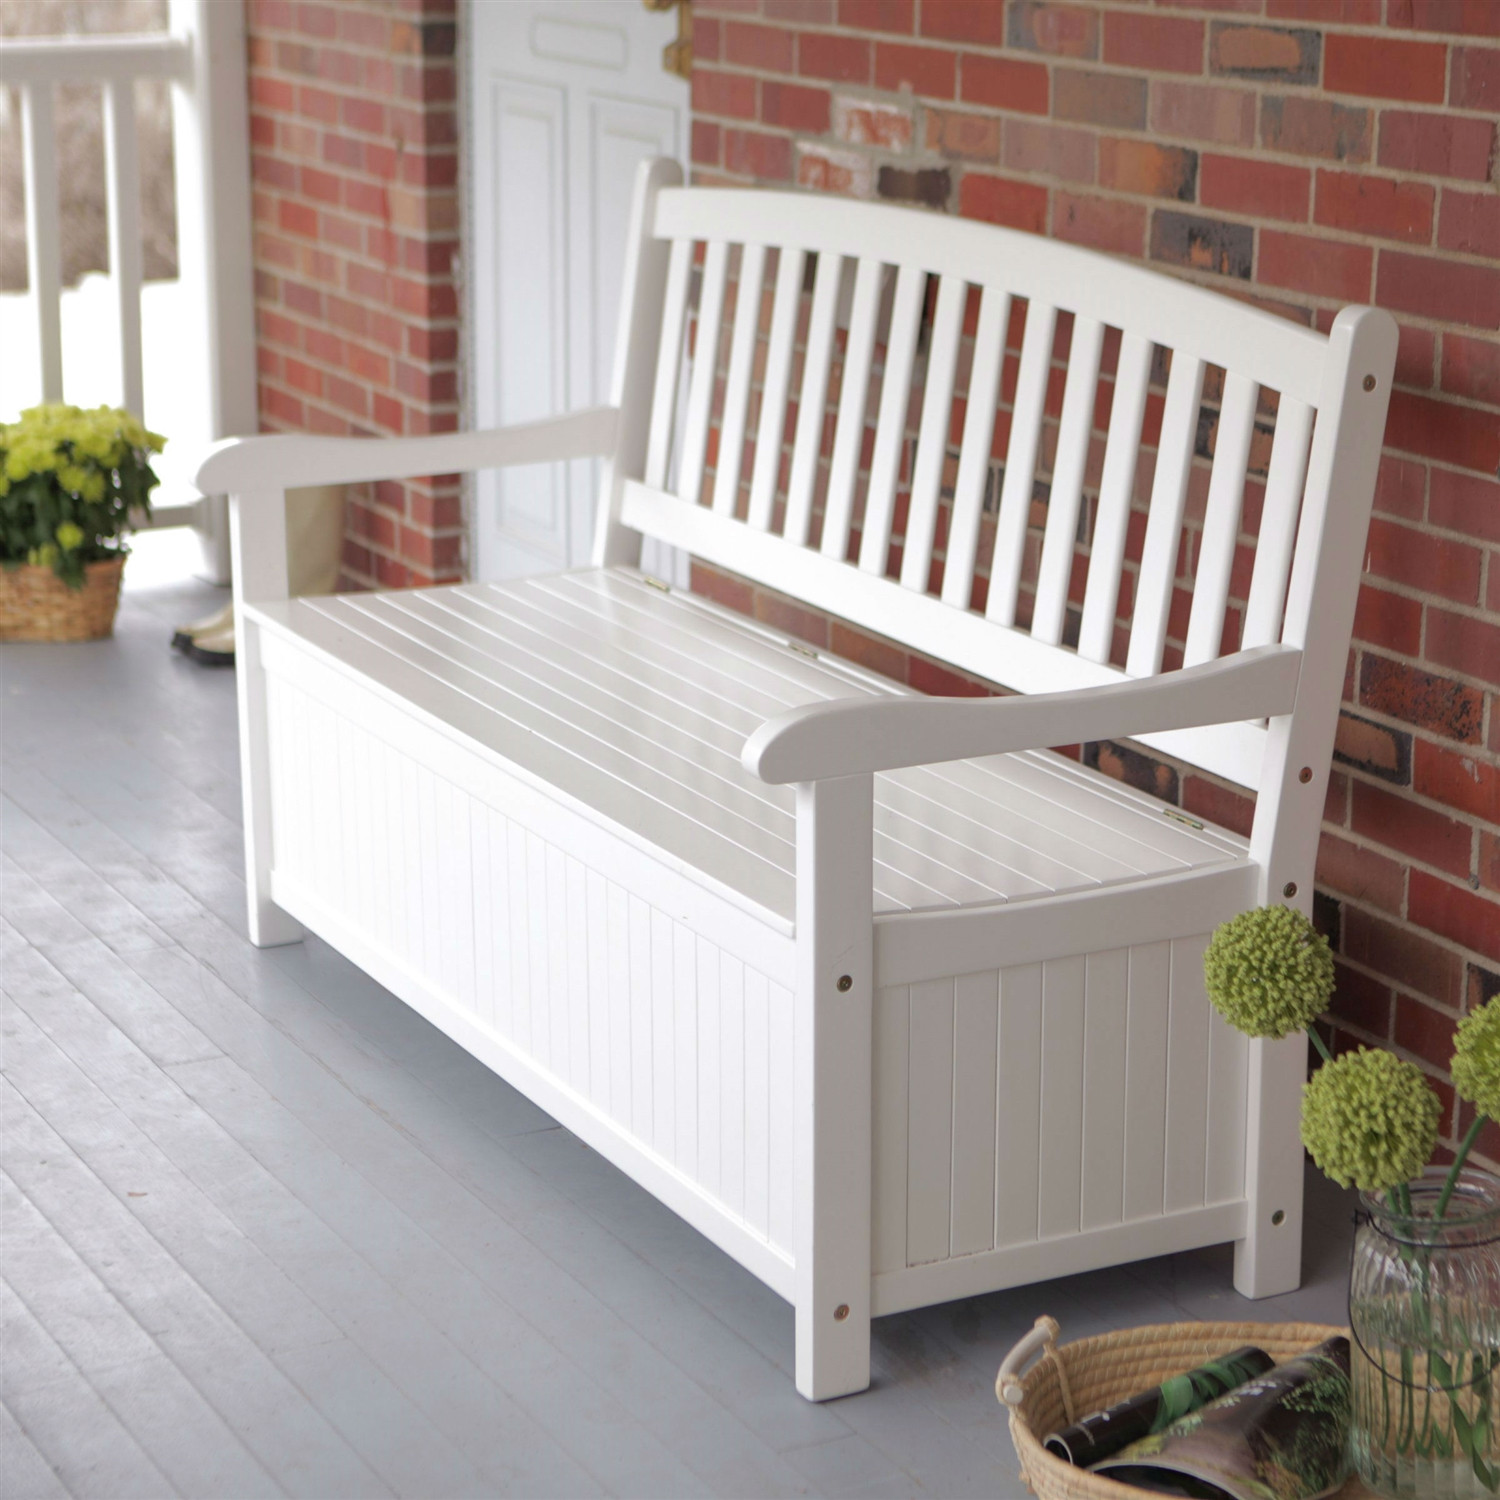 Storage Bench For Deck
 White Wood 4 Ft Outdoor Patio Garden Bench Deck Box with